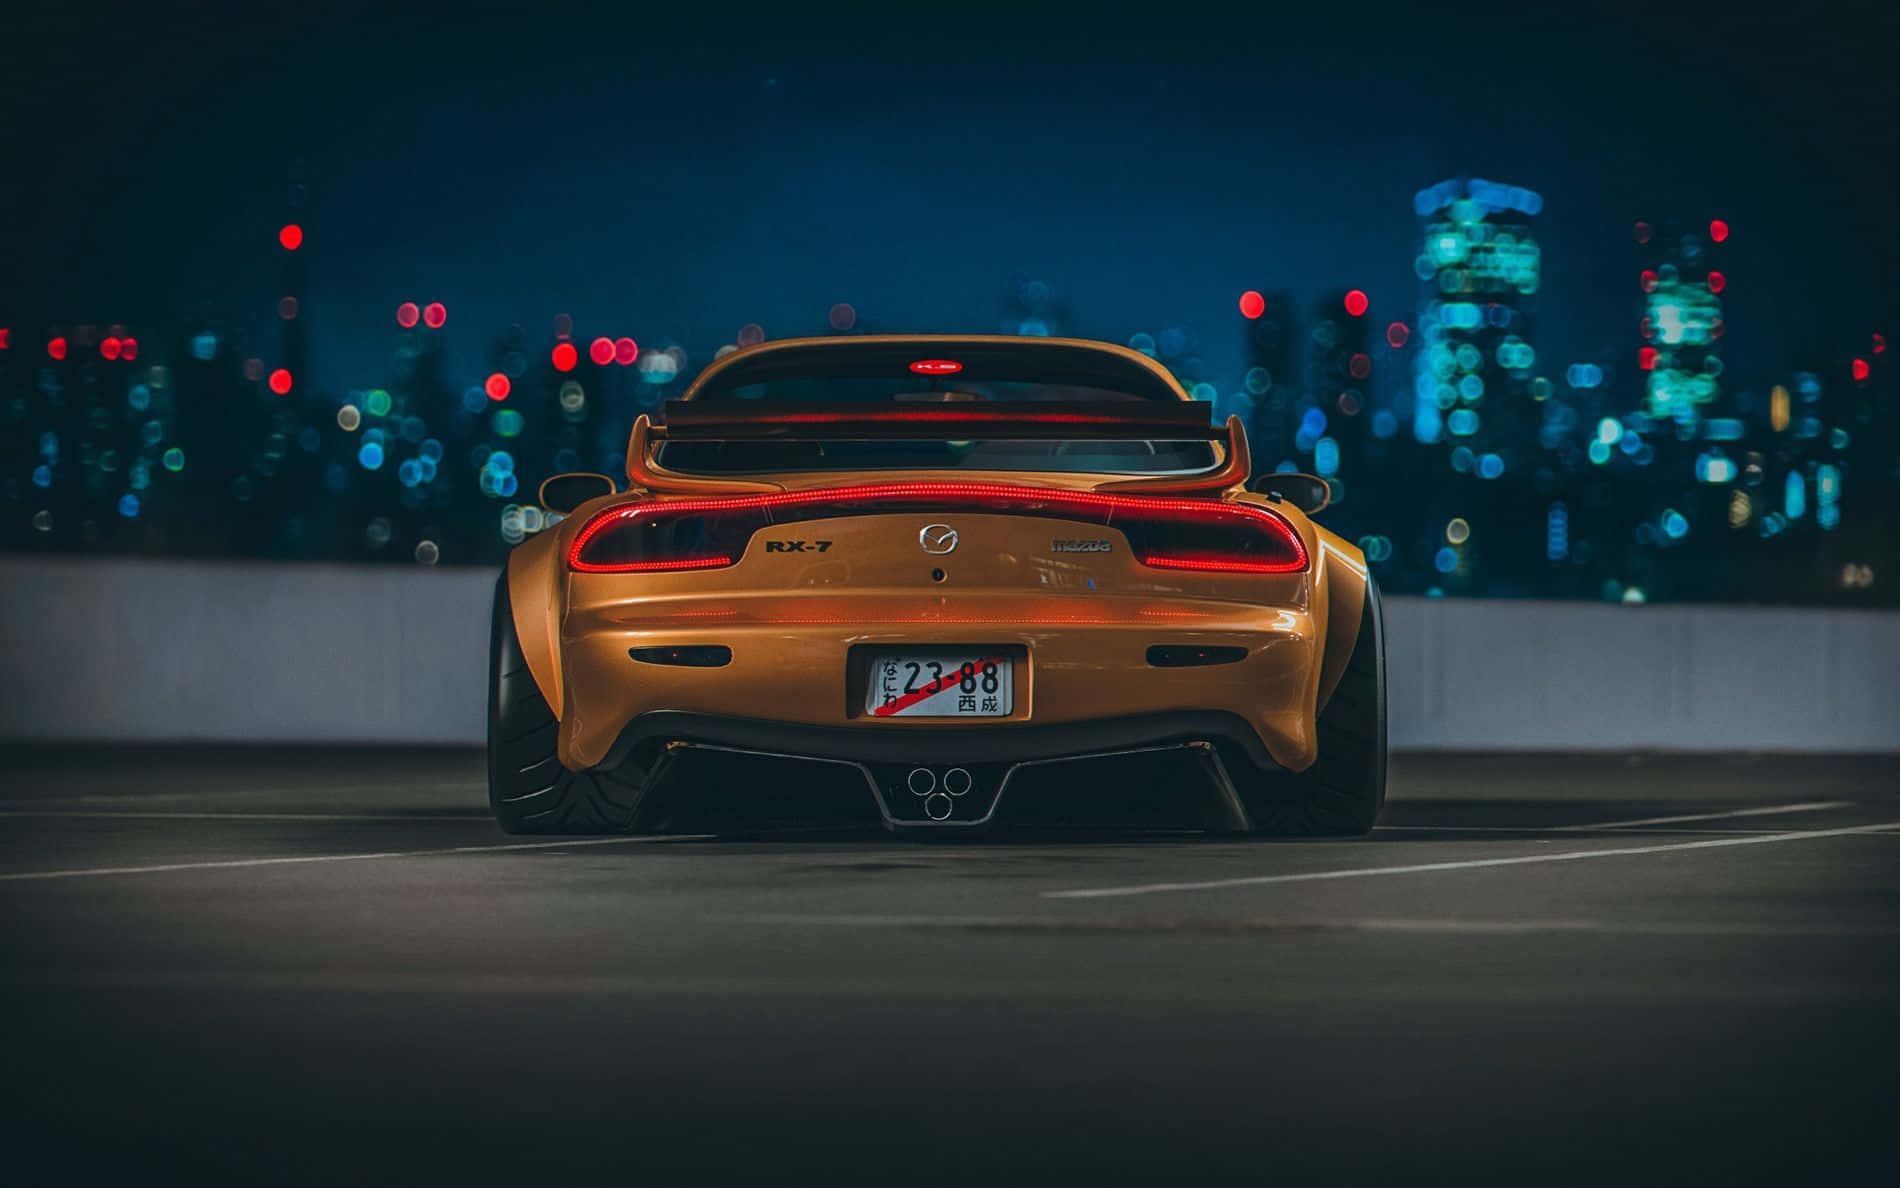 Brown Mazda Rx 7 With Cityscape Background